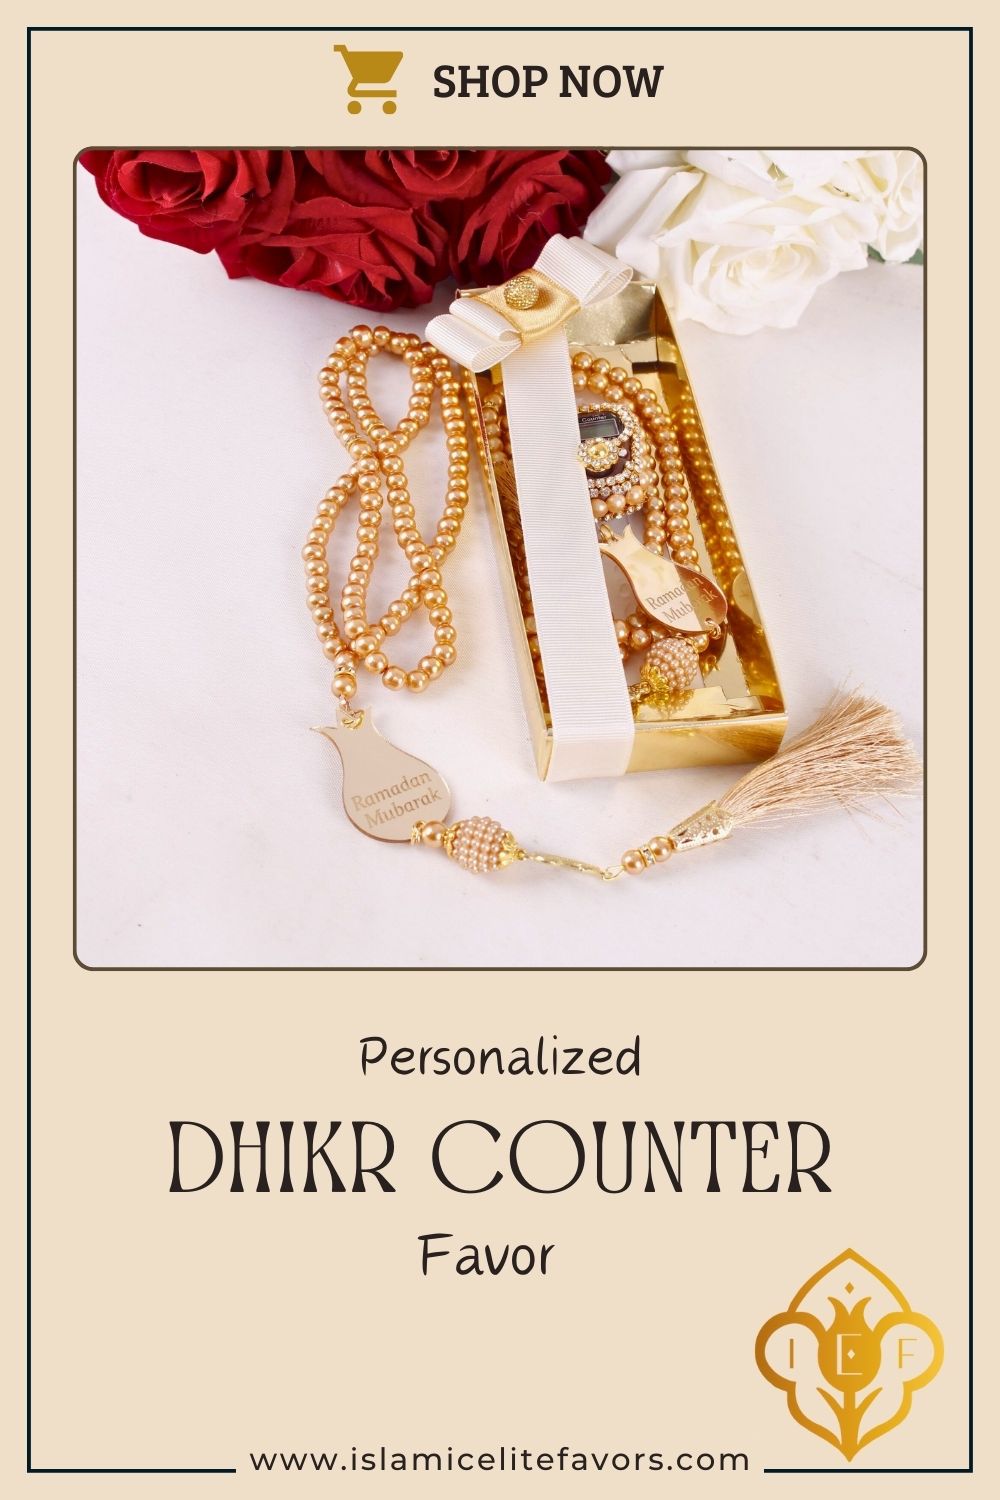 Personalized  Dhikr Counter Pearl Prayer Beads Ramadan Islamic Favors - Islamic Elite Favors is a handmade gift shop offering a wide variety of unique and personalized gifts for all occasions. Whether you're looking for the perfect Ramadan, Eid, Hajj, wedding gift or something special for a birthday, baby shower or anniversary, we have something for everyone. High quality, made with love.